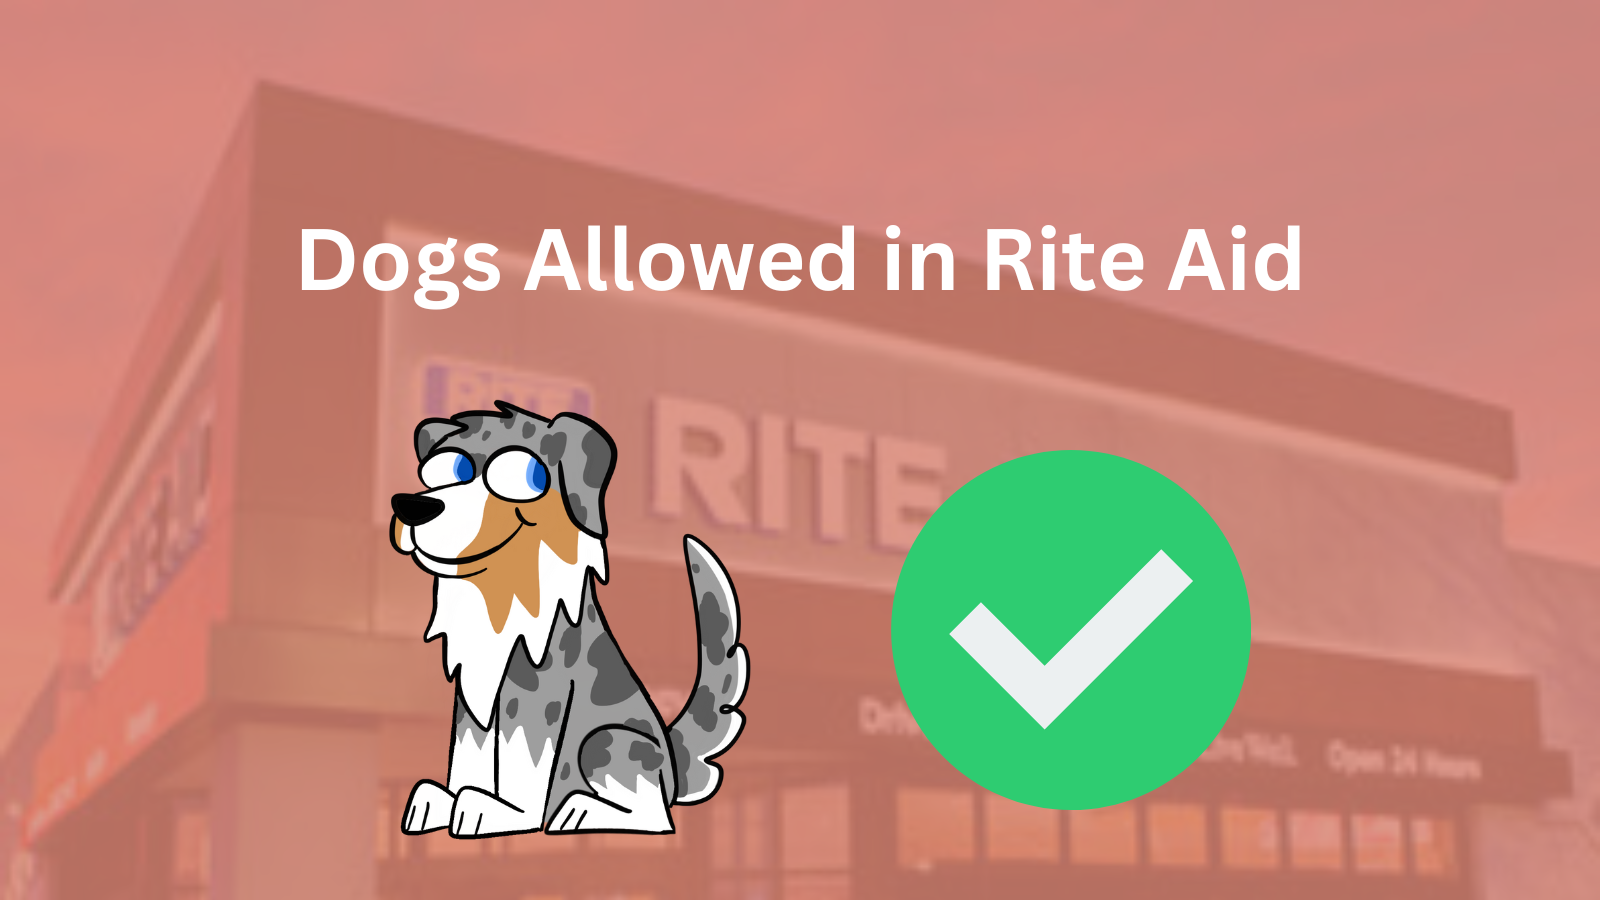 Image Text: "Dogs Allowed in Rite Aid"